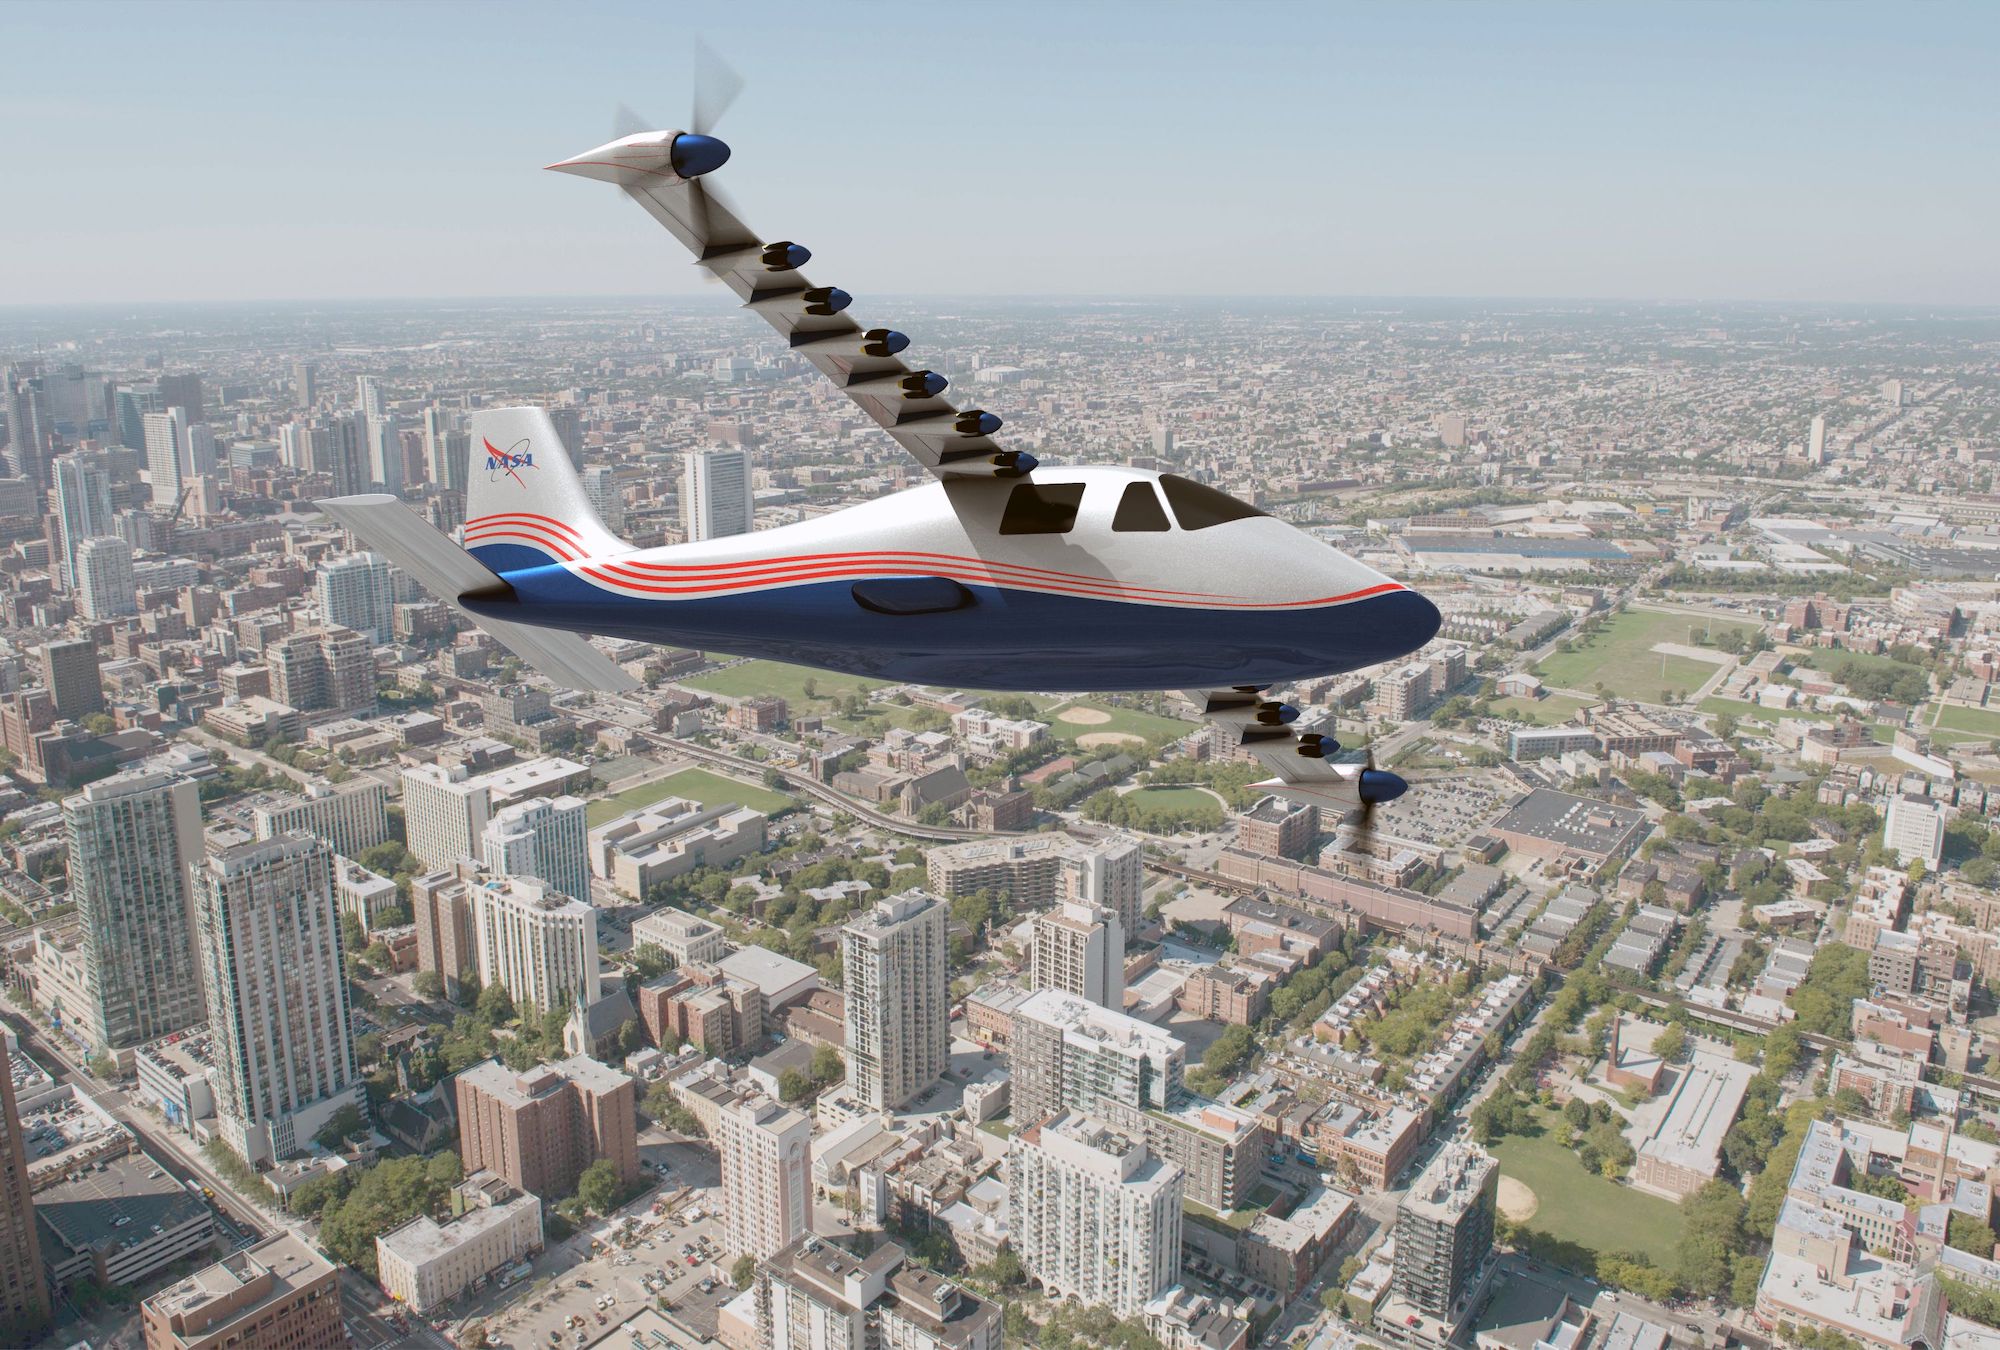 NASA aims to fly its experimental electric plane this year